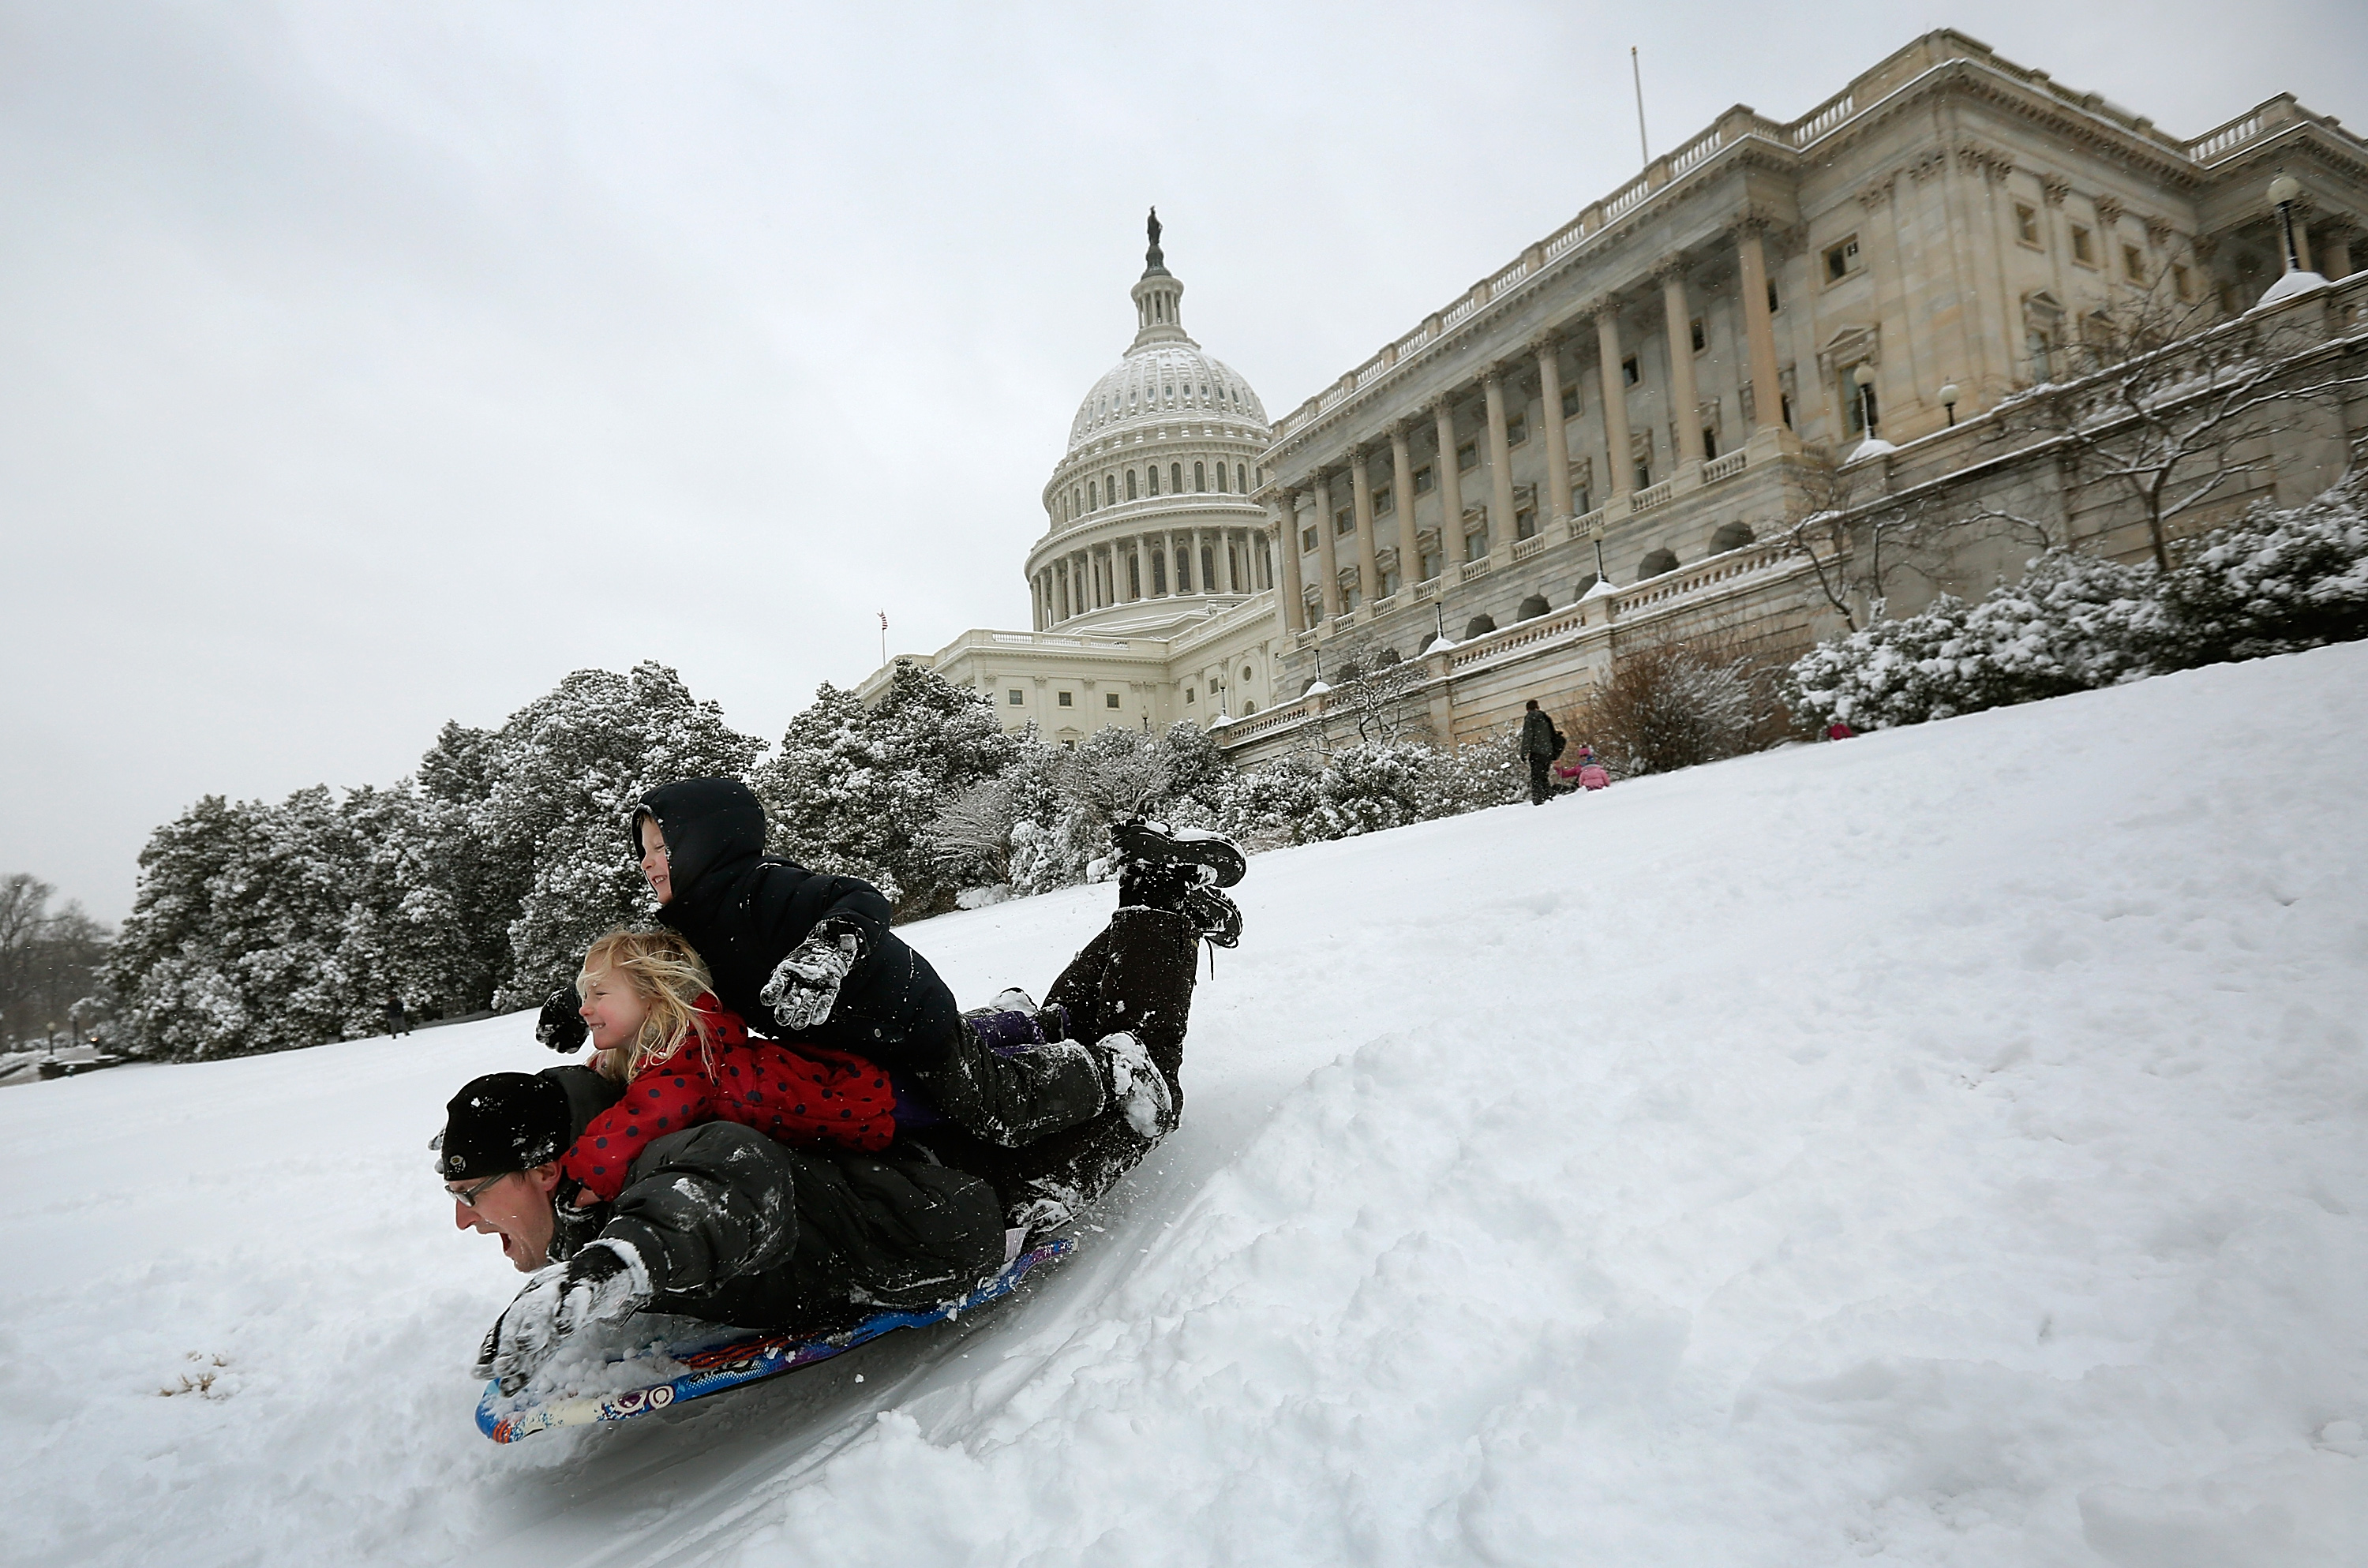 Jon Ward sleds with his daughter Gwen and son Jethro on the west lawn of the U.S. Capitol on March 17, 2014 in Washington D.C. (Win McNamee—Getty Images)